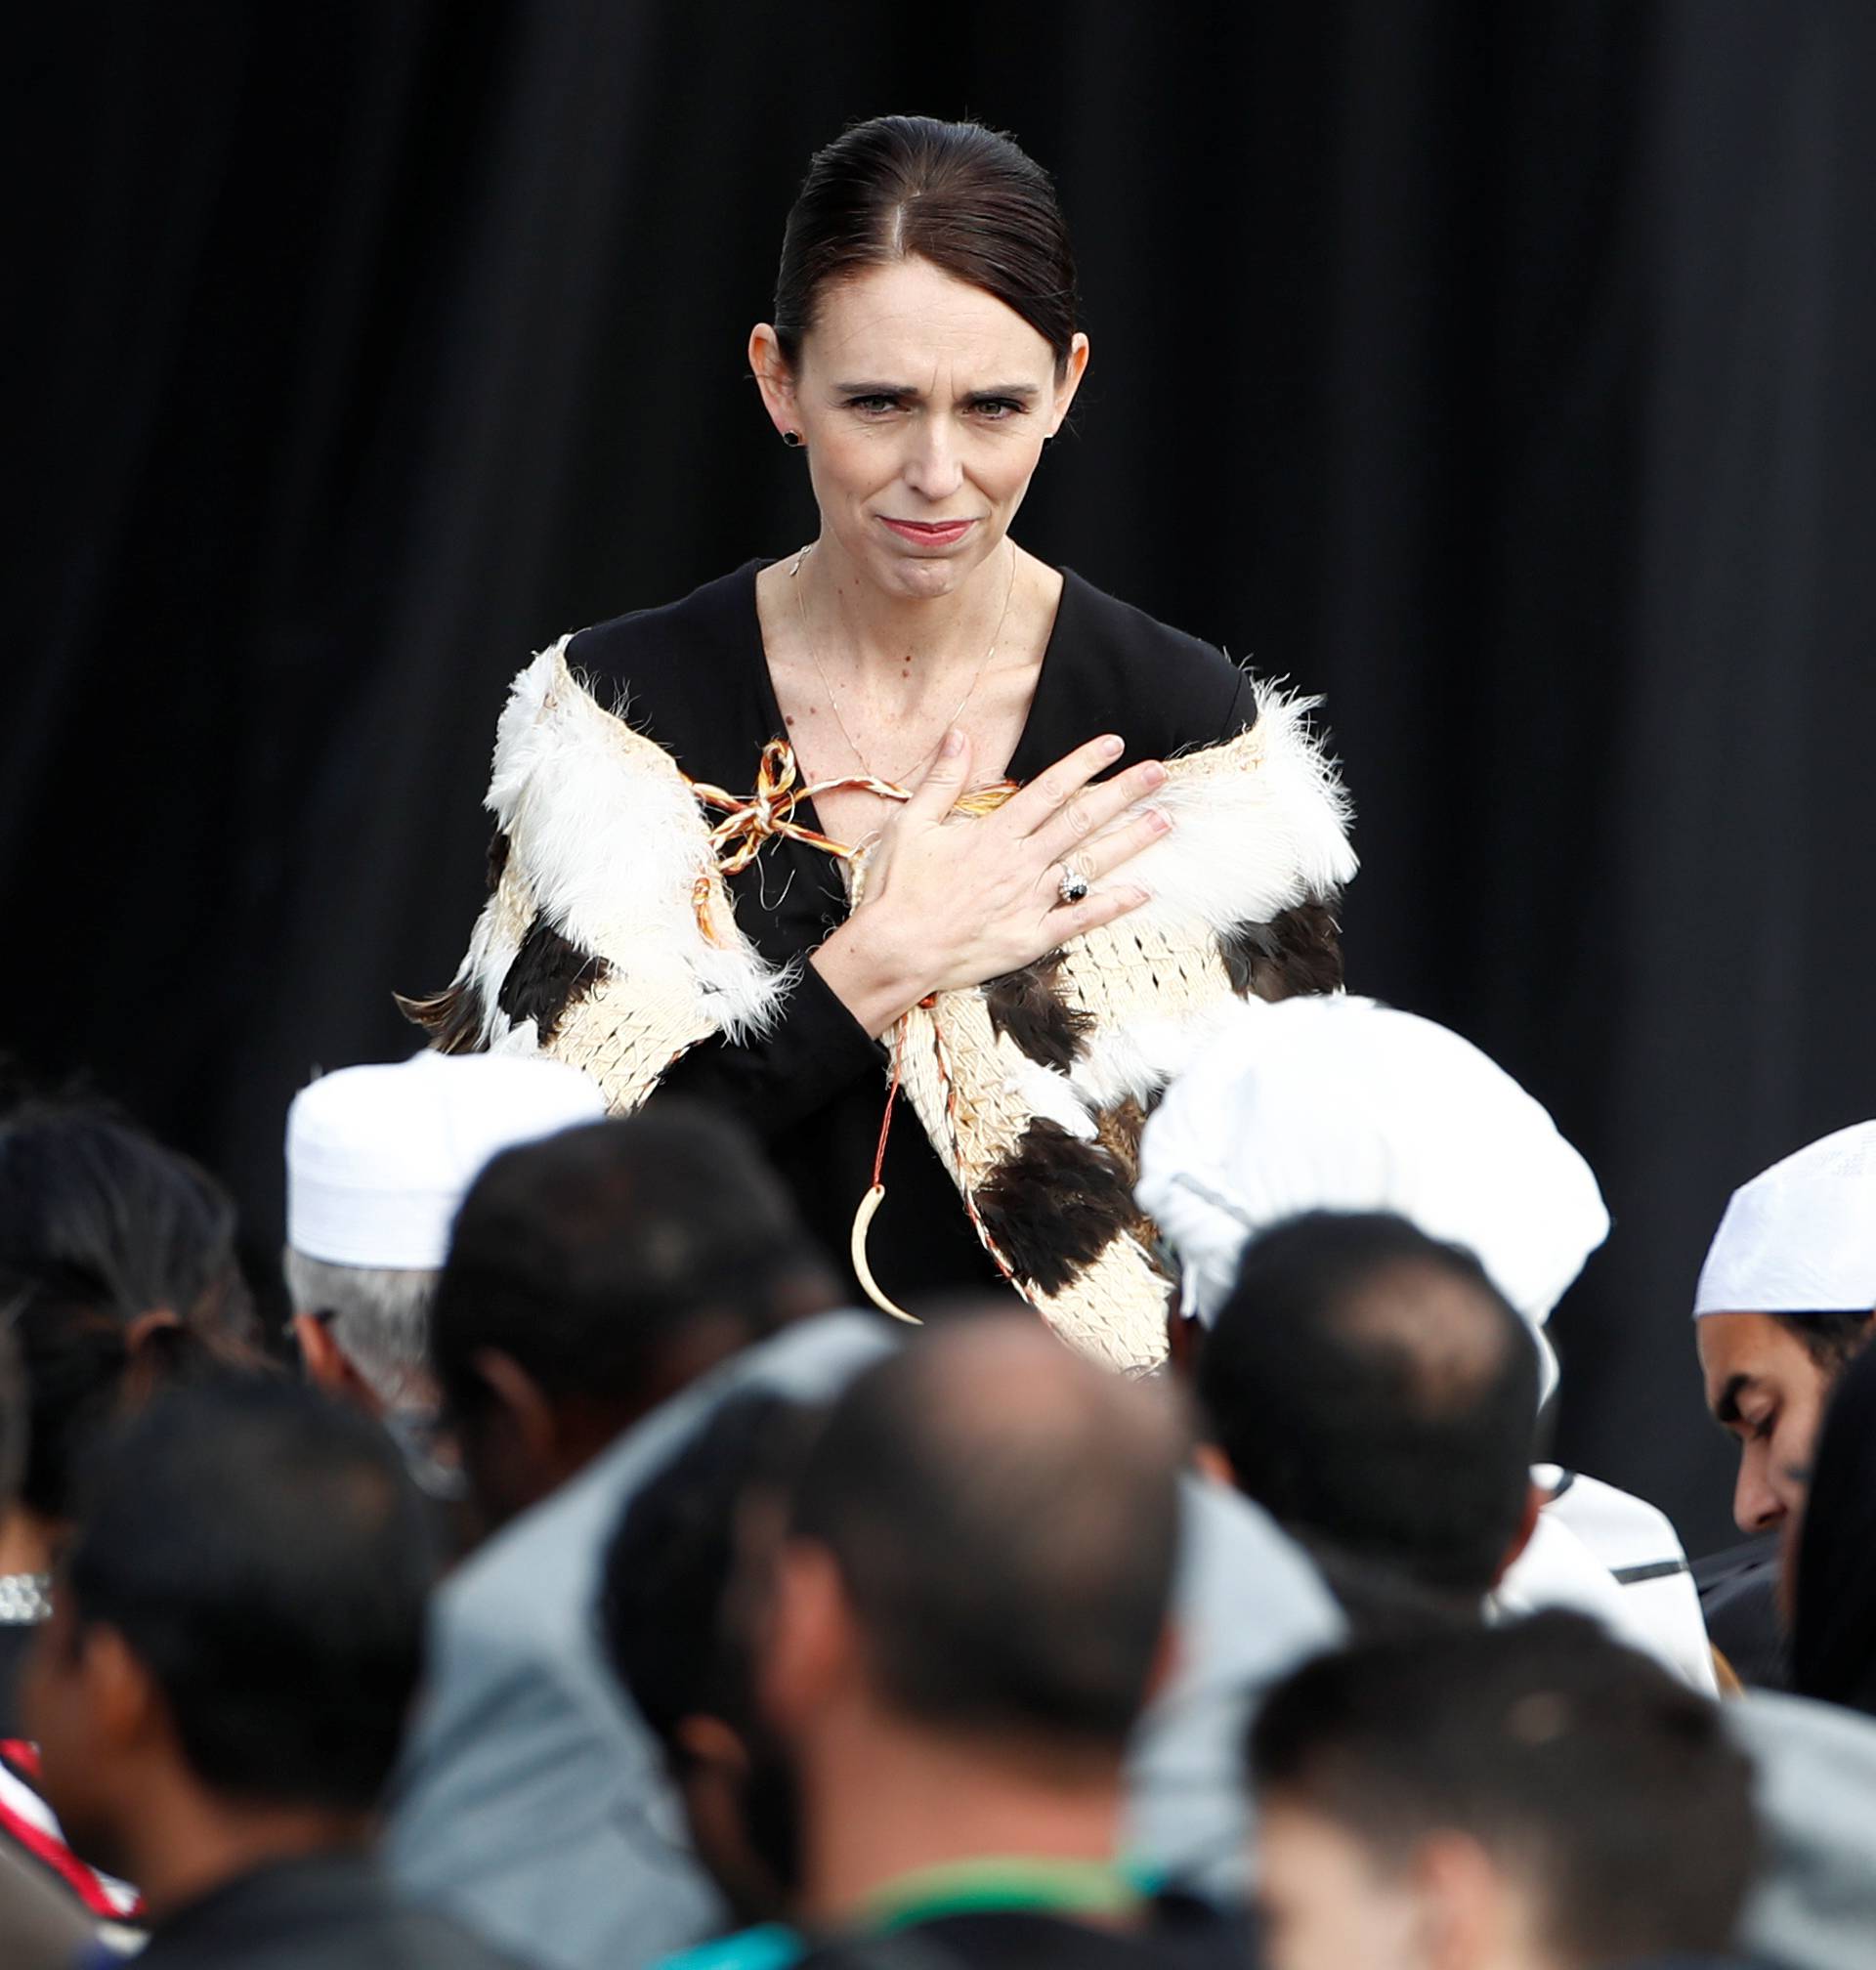 New Zealand's Prime Minister Jacinda Arden gestures to relatives of victims of the mosque attacks during the national remembrance service in Christchurch